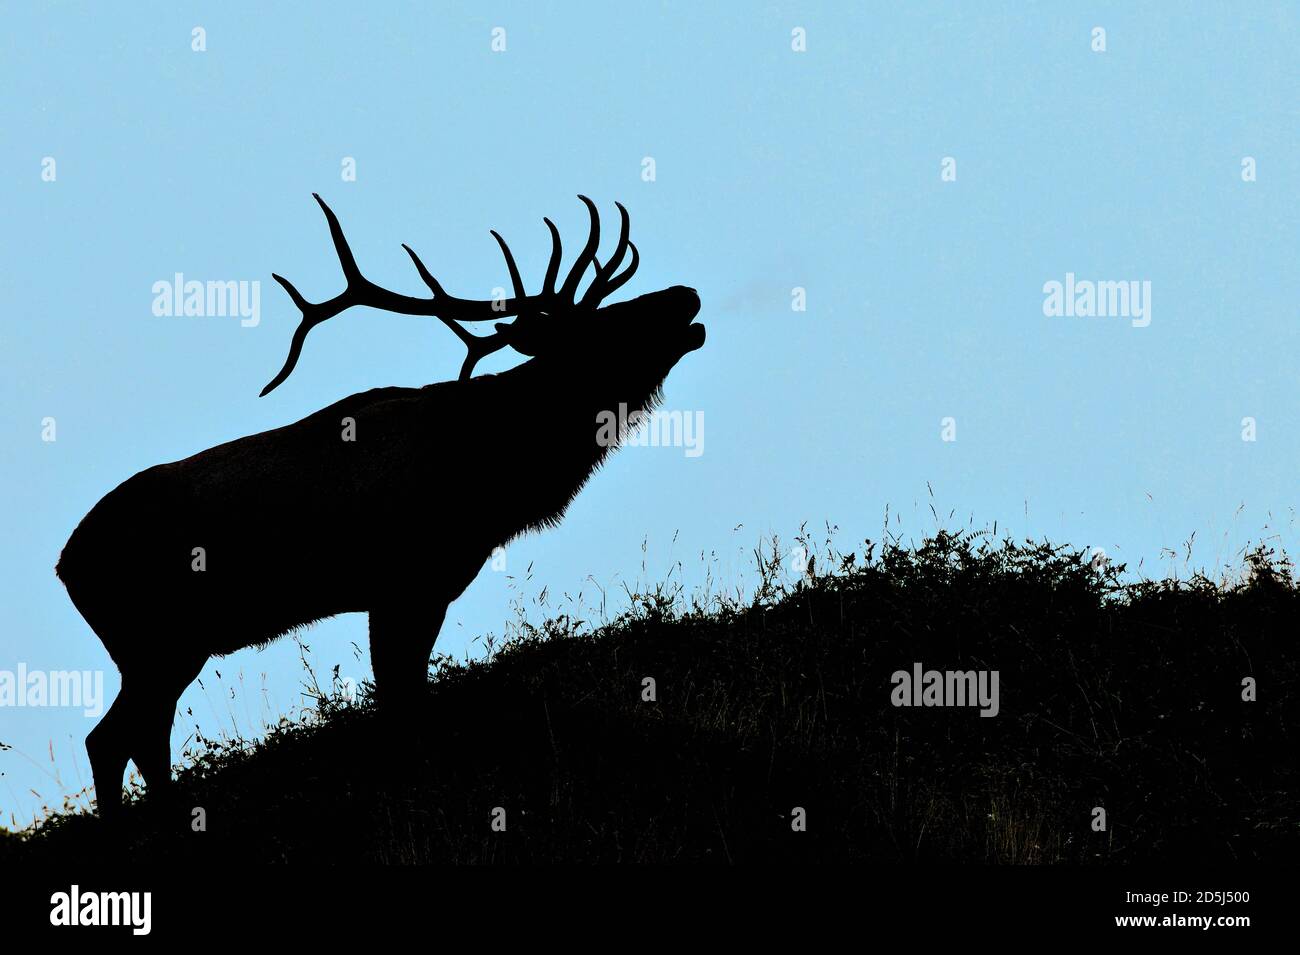 A silhouette image of a large bull elk "Ovis canadensis", standing on a hilltop, bugling a challenge to another bull elk in rural Alberta Canada Stock Photo